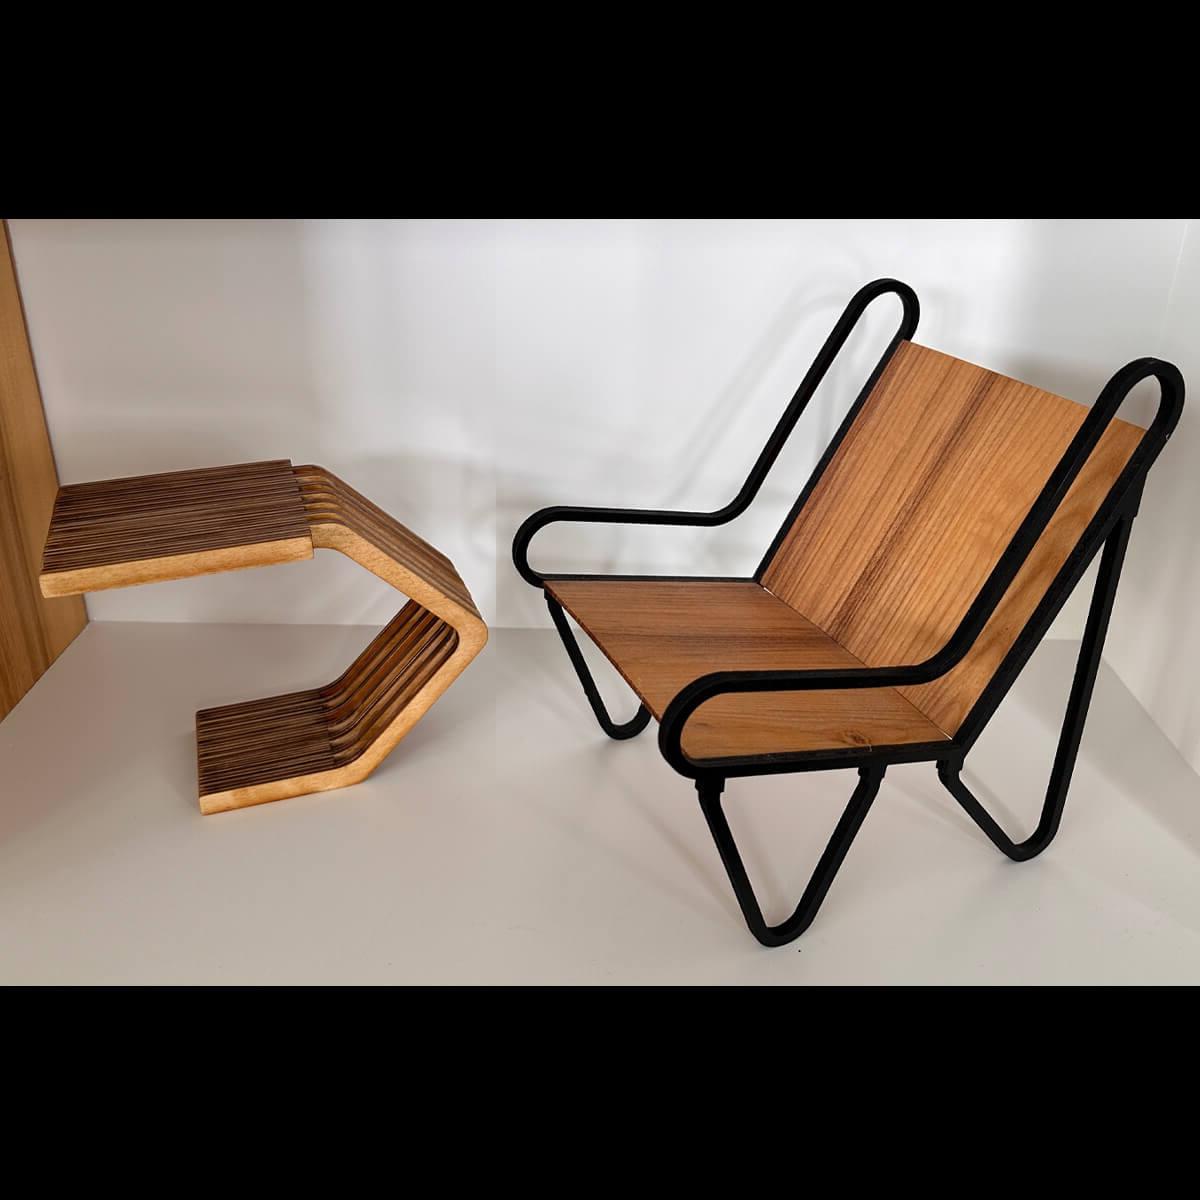 Student chair and table design